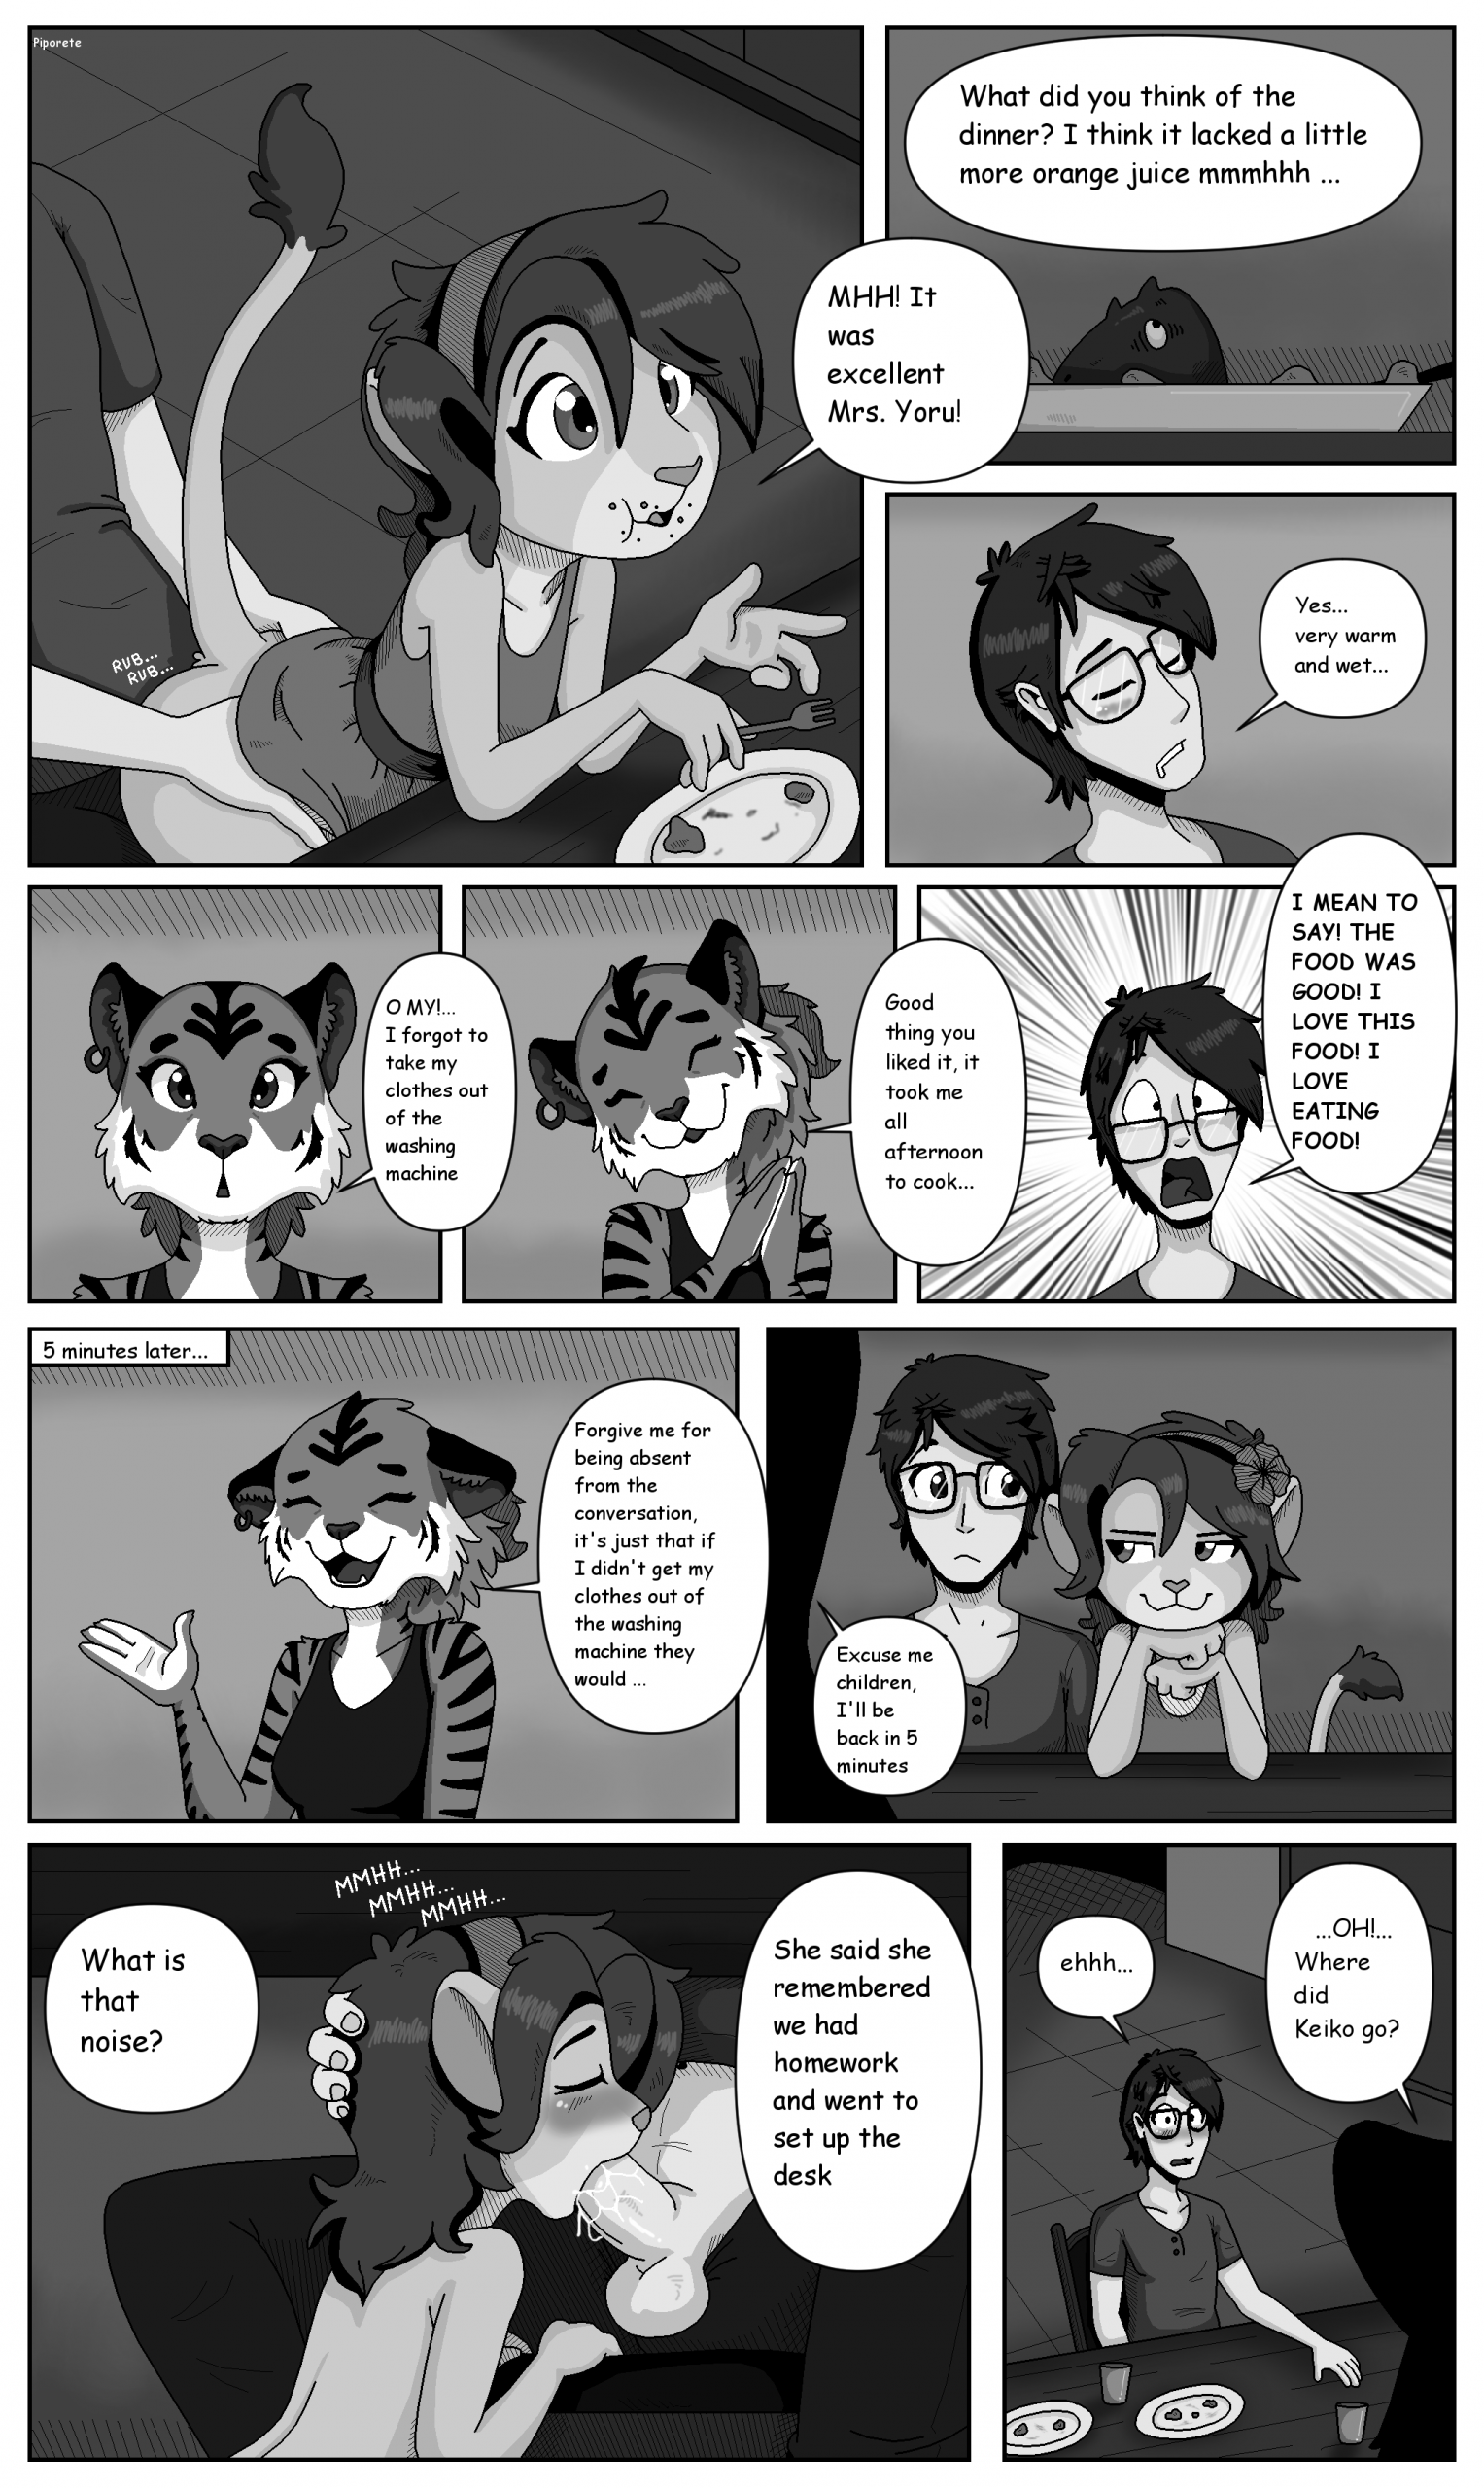 Keiko and Jin - Chapter 1 - 3 porn comic picture 8